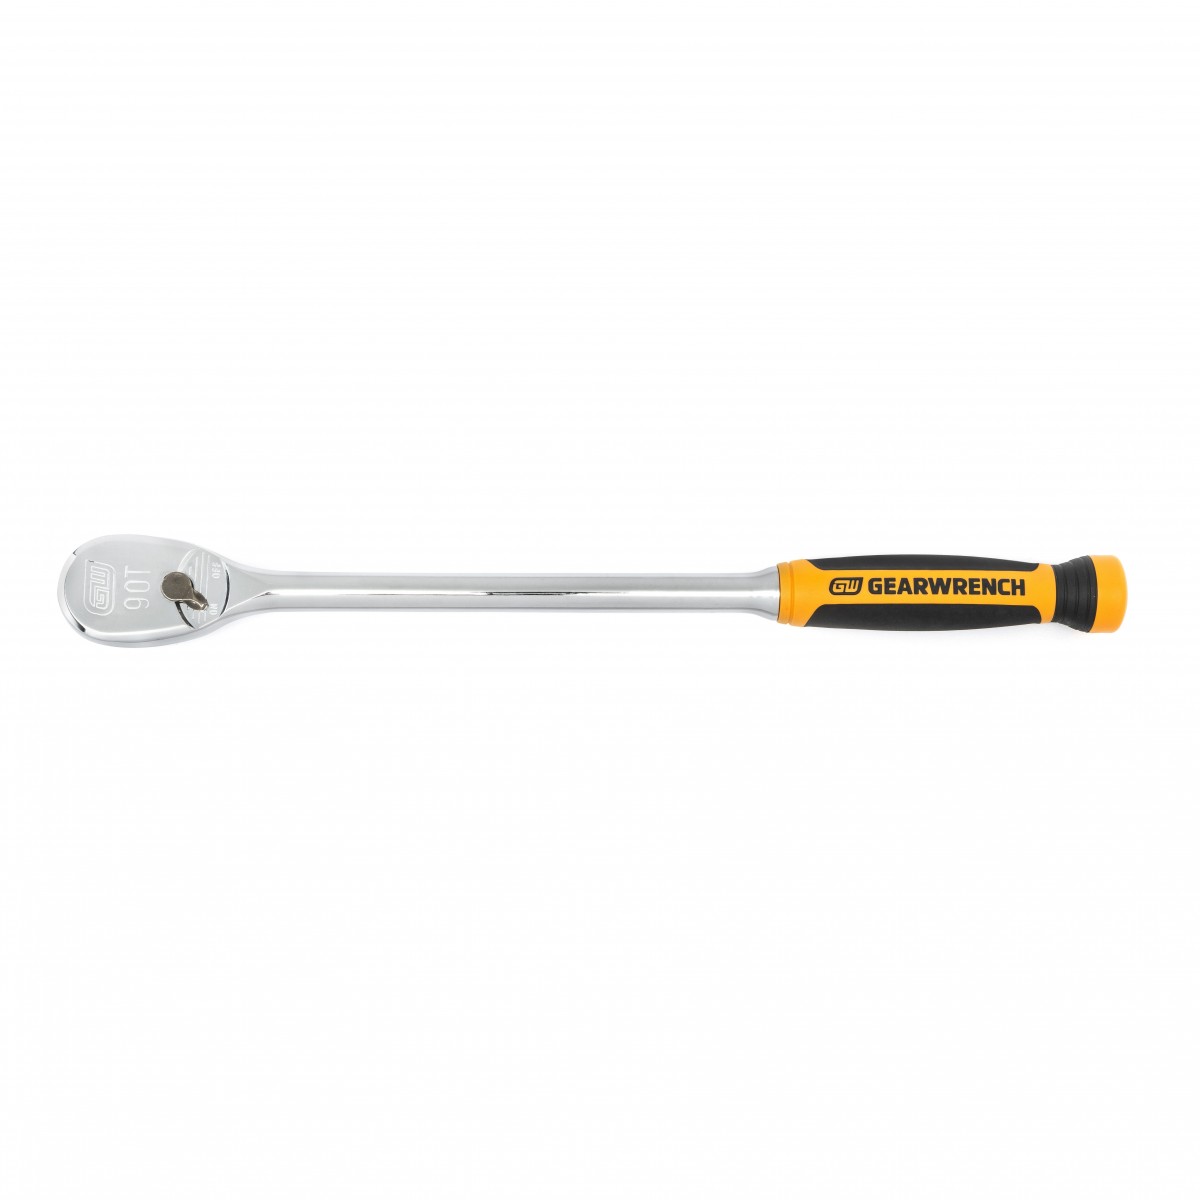 GearWrench 329-81361T 0.5 in. Drive 90 Tooth Cushion Grip Long Handle Ratchet